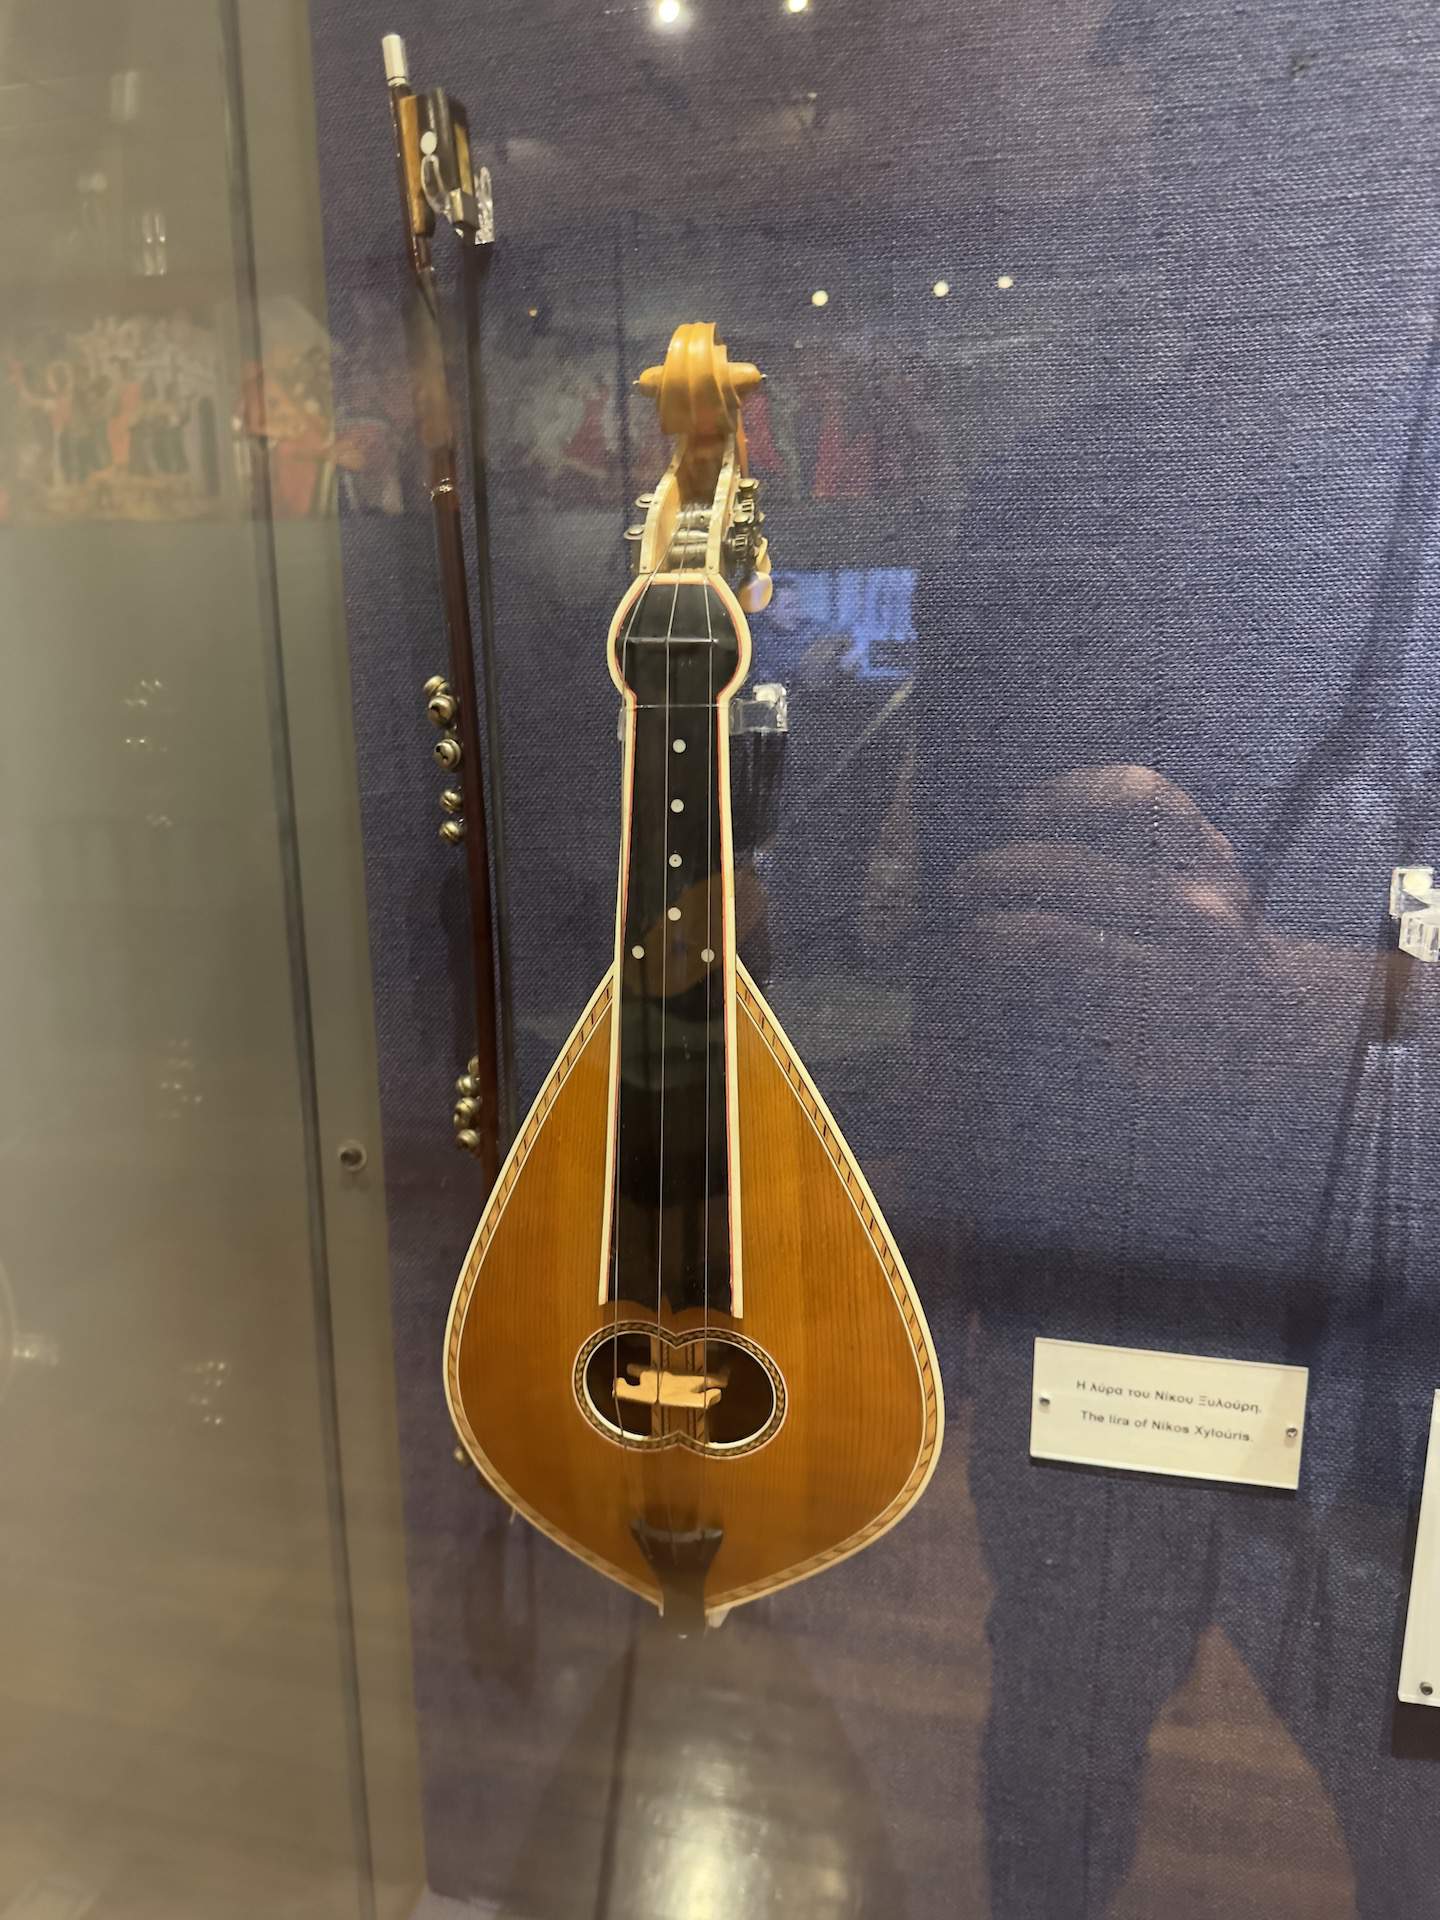 Líra of Nikos Xylouris (1936-1980) at the Museum of Greek Folk Musical Instruments in Athens, Greece